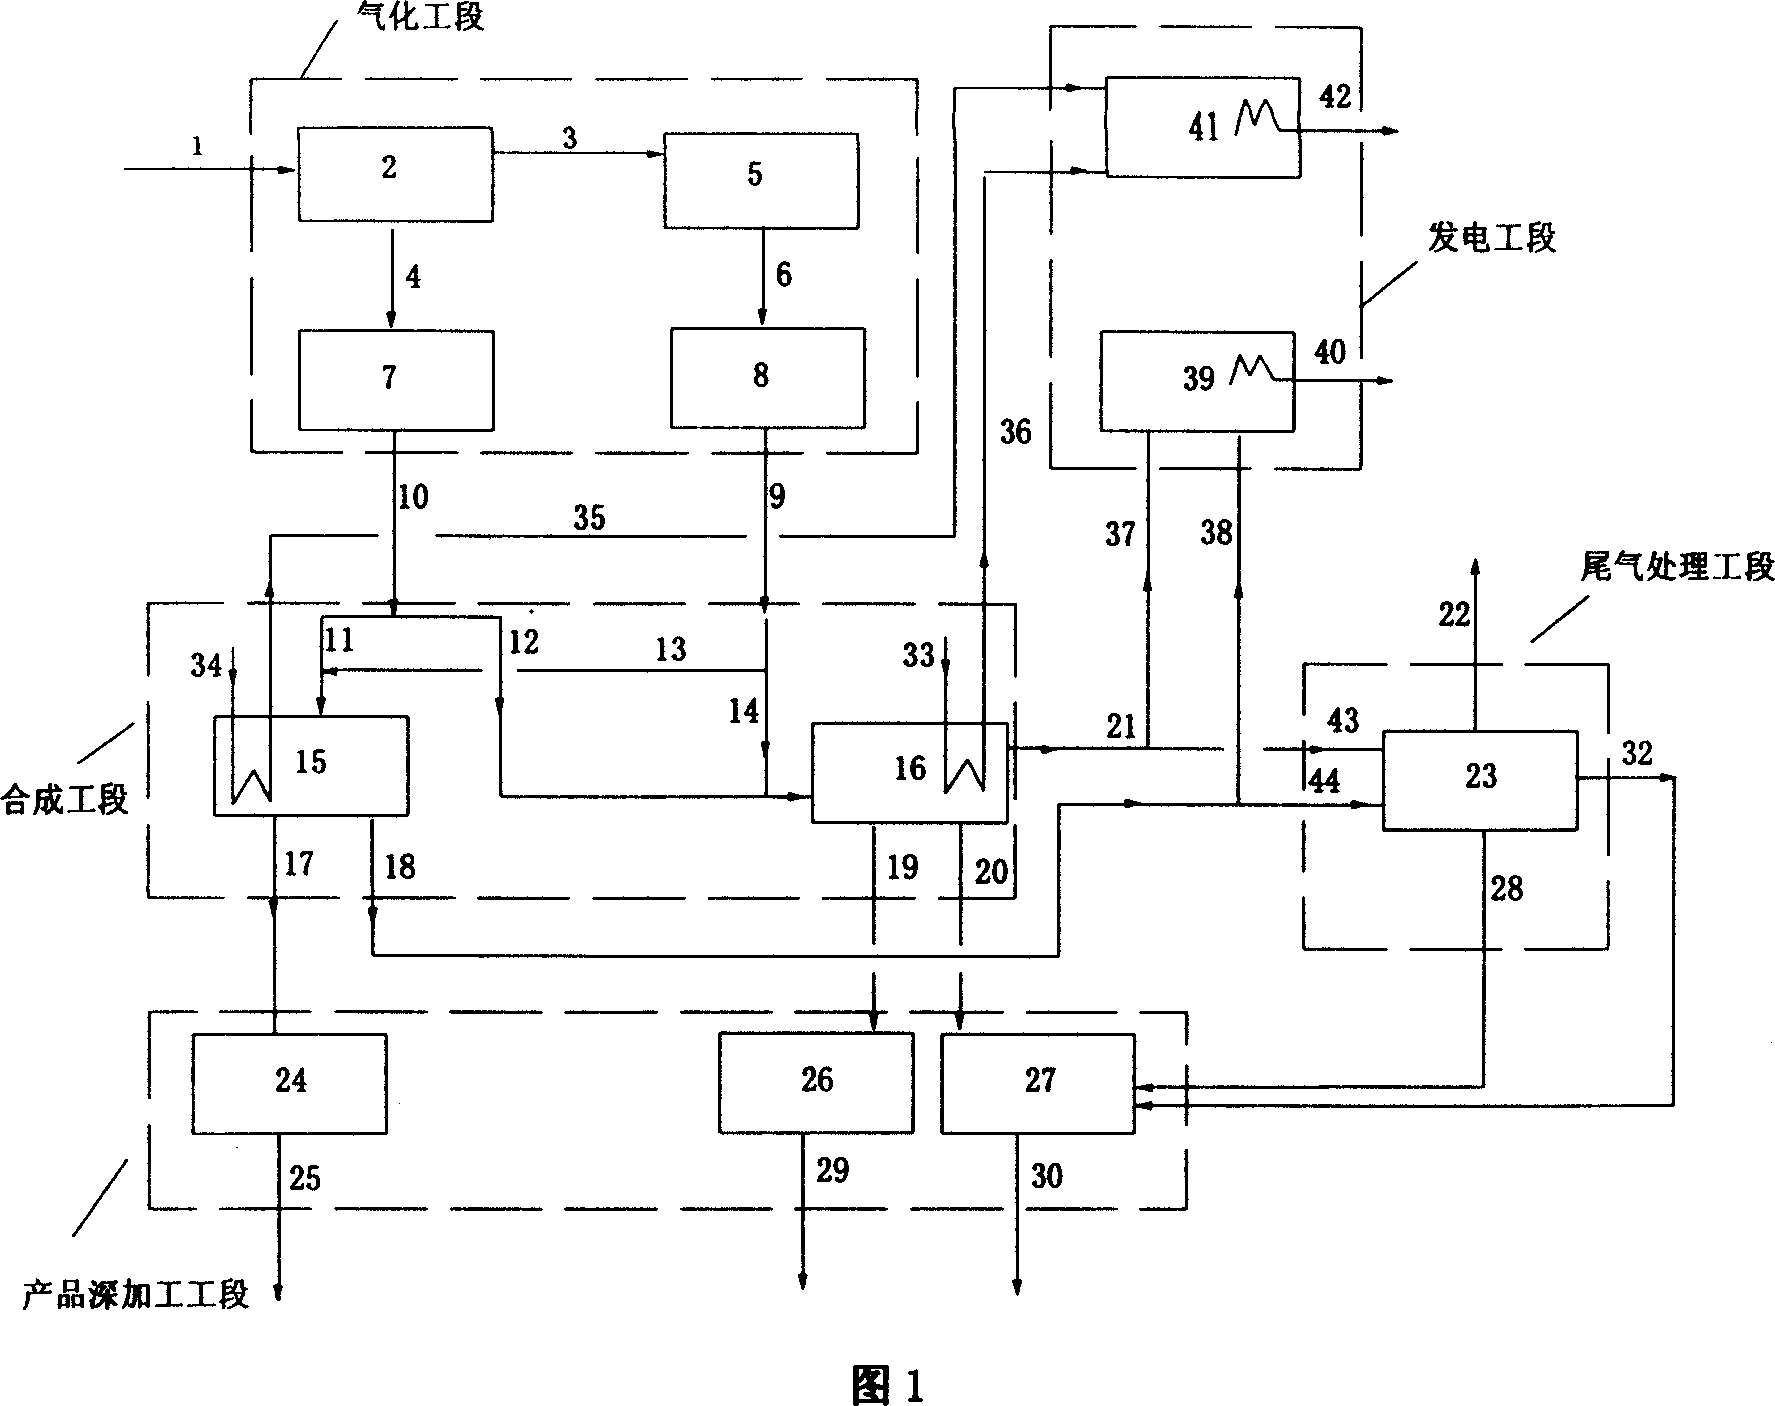 Method of coproducing oil product, methanol and electric energy using carbon containing combustible solid as raw material